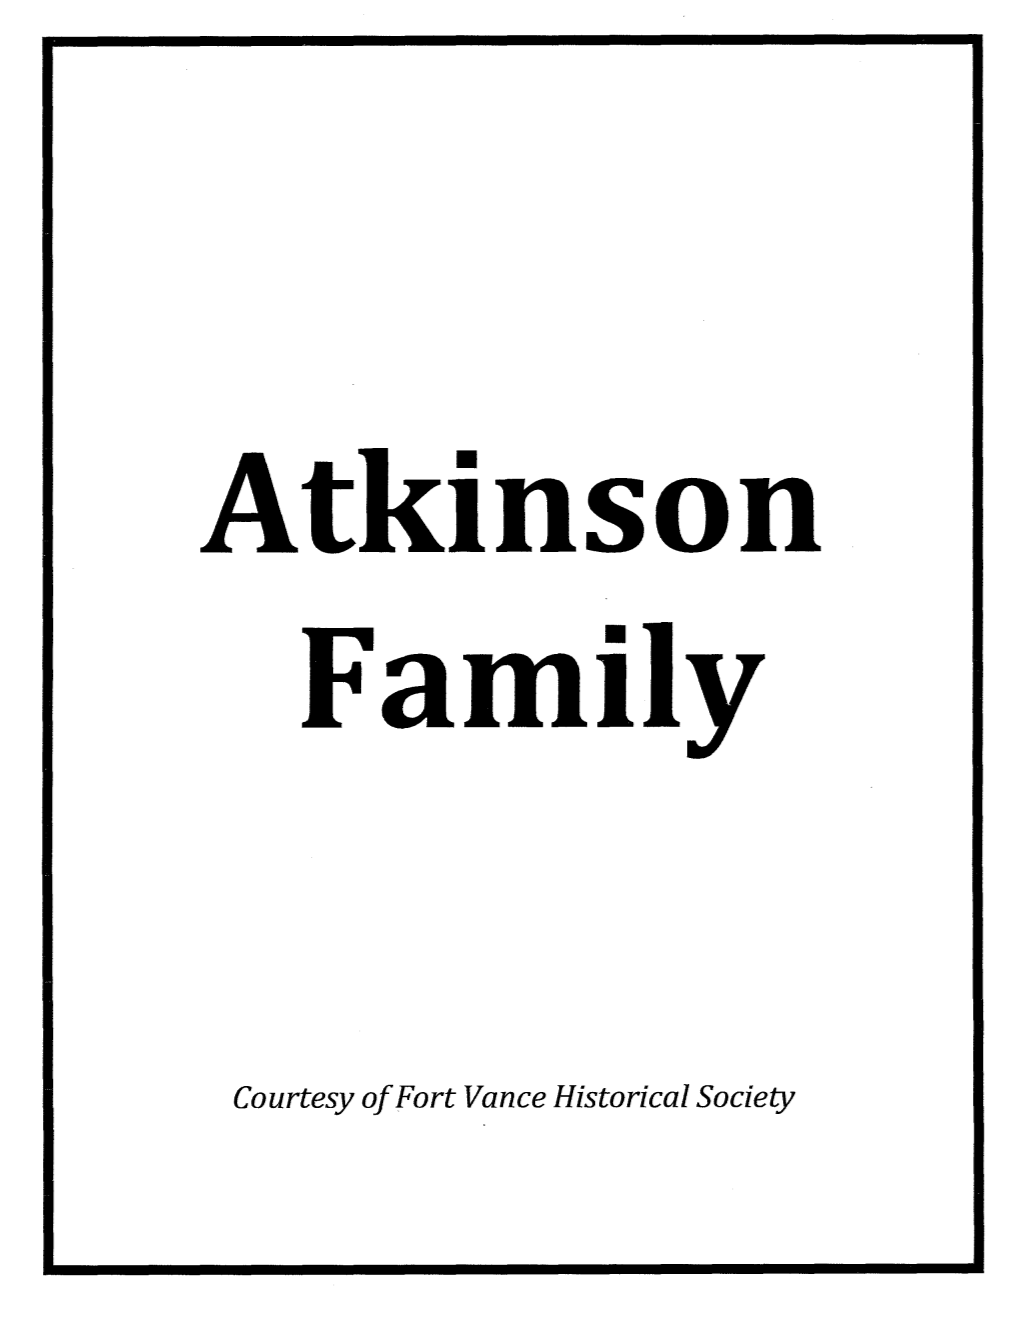 Atkinson Family Narrative ( One of 18 Separate Narratives in the Book) Is the Major Family Documented and Consists of 59 of the 263Pp